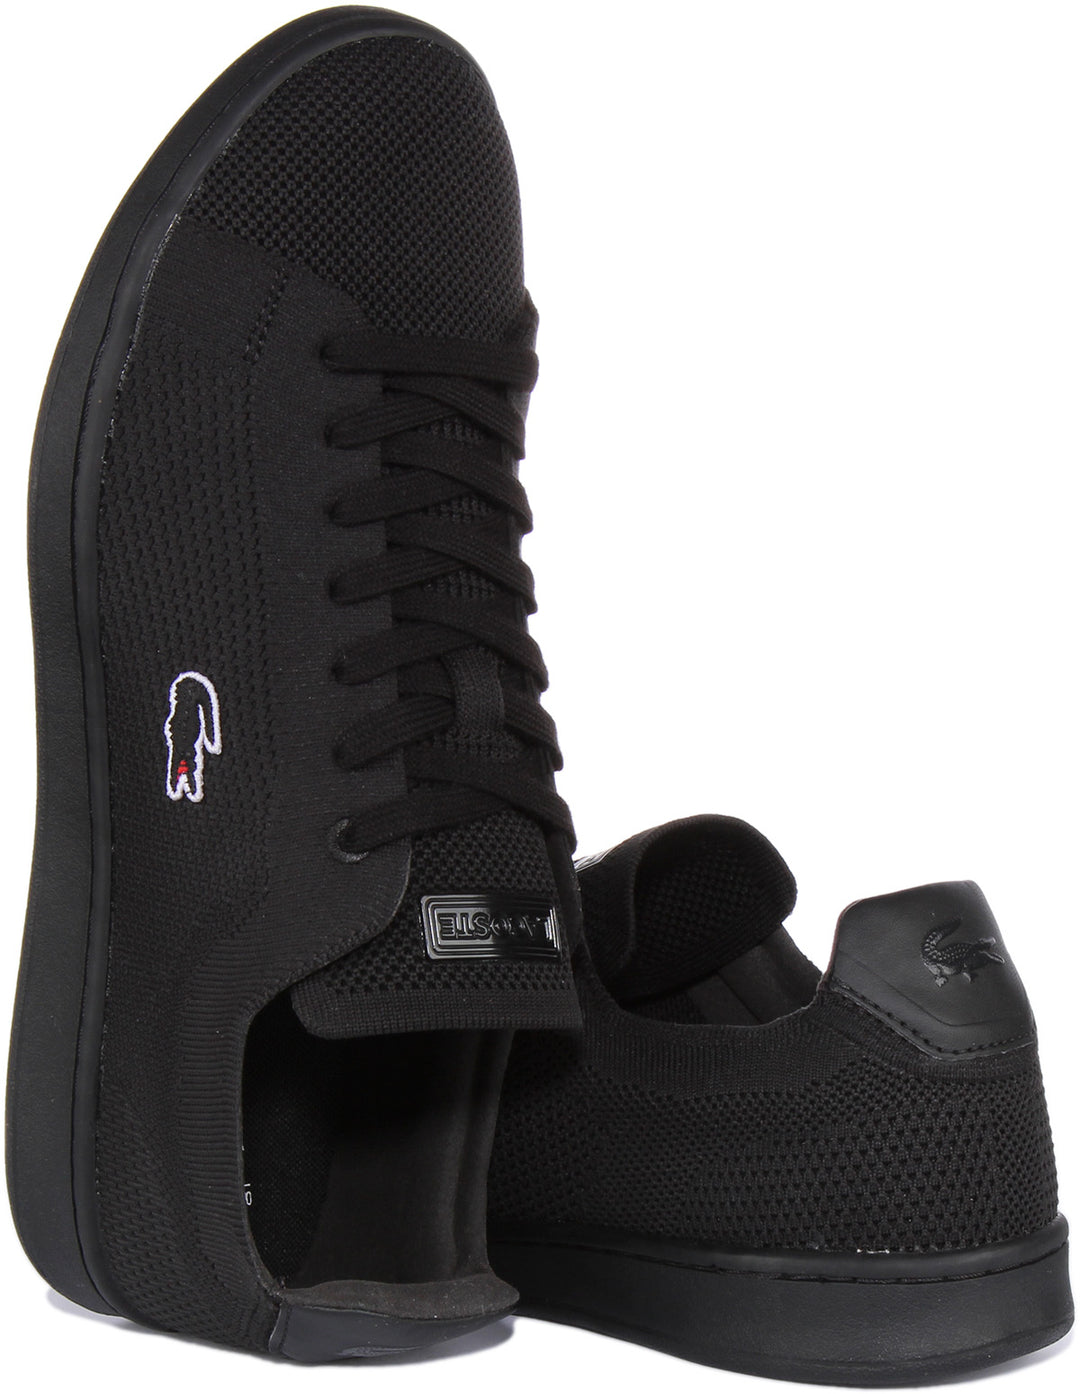 Lacoste Carnaby Piquee In Black Black For Men